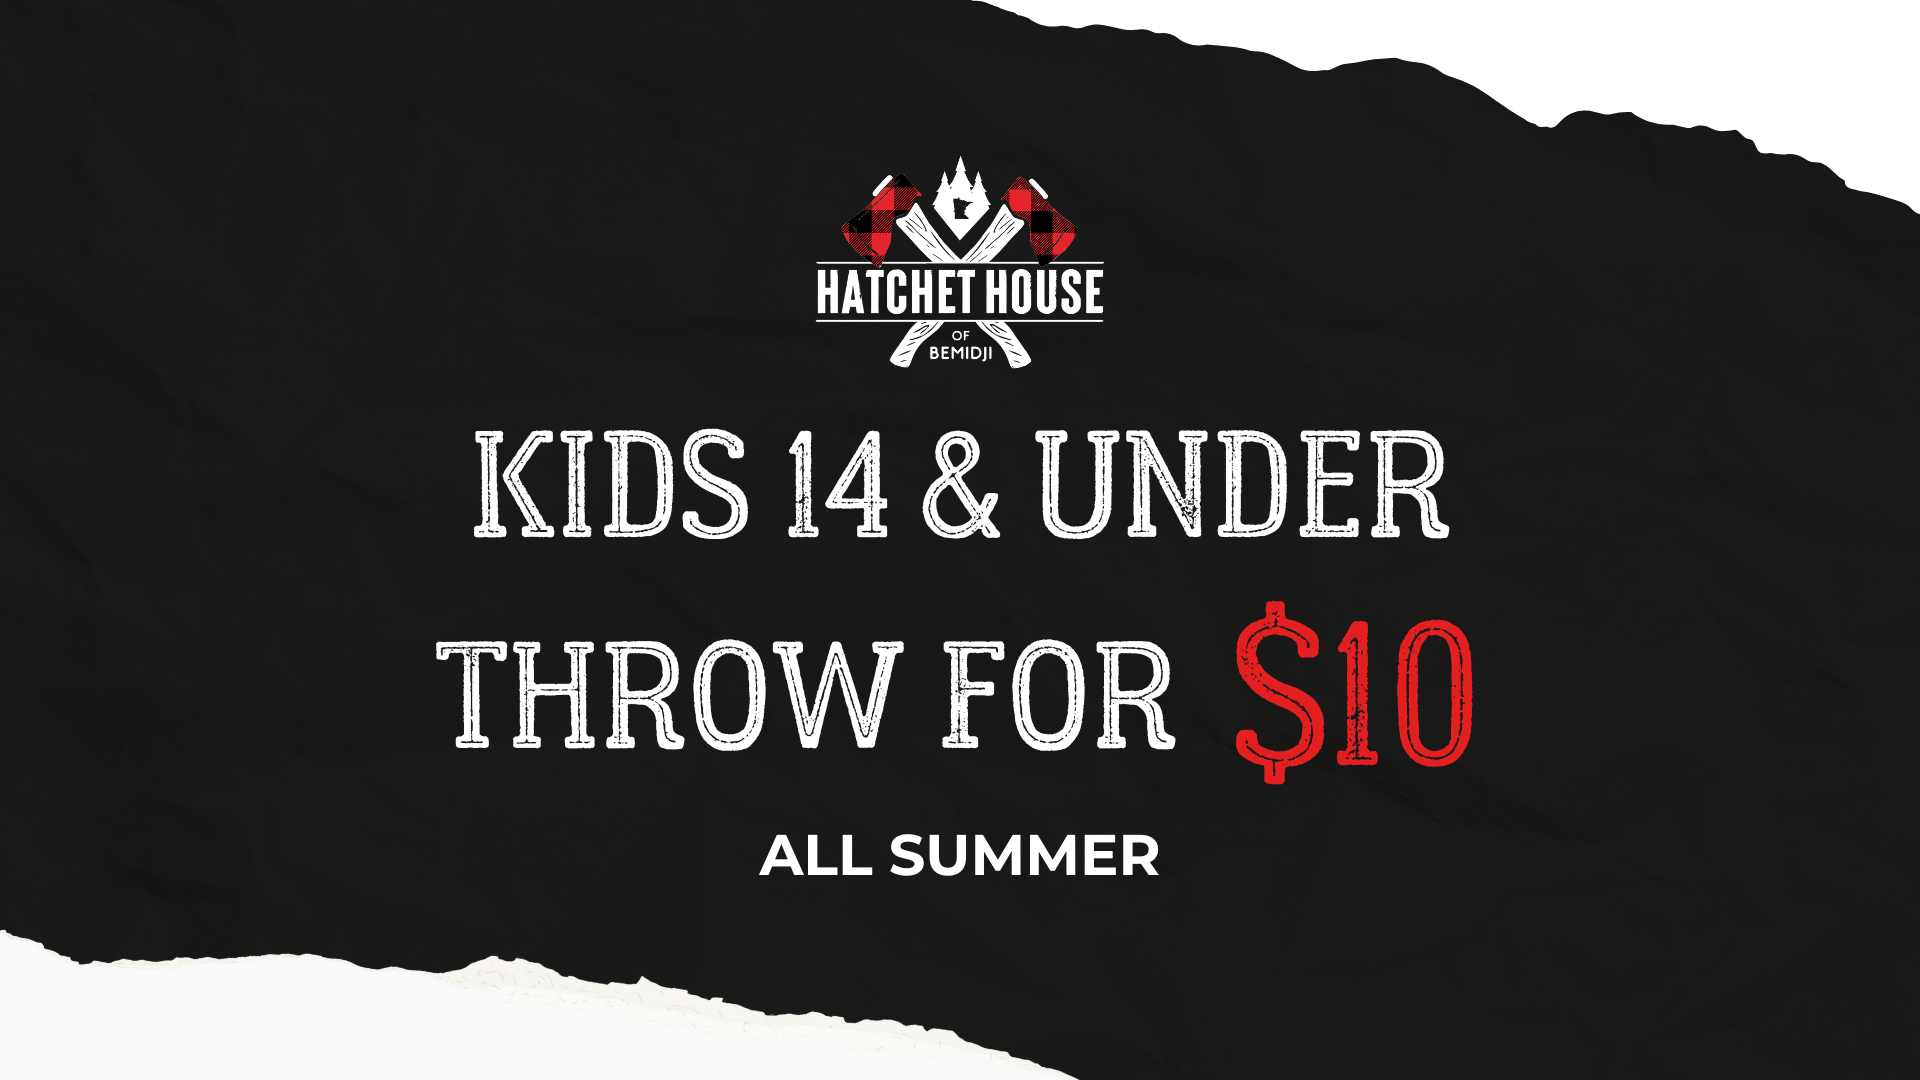 Kids 14 and under throw for $10 all summer at Hatchet House of Bemidji